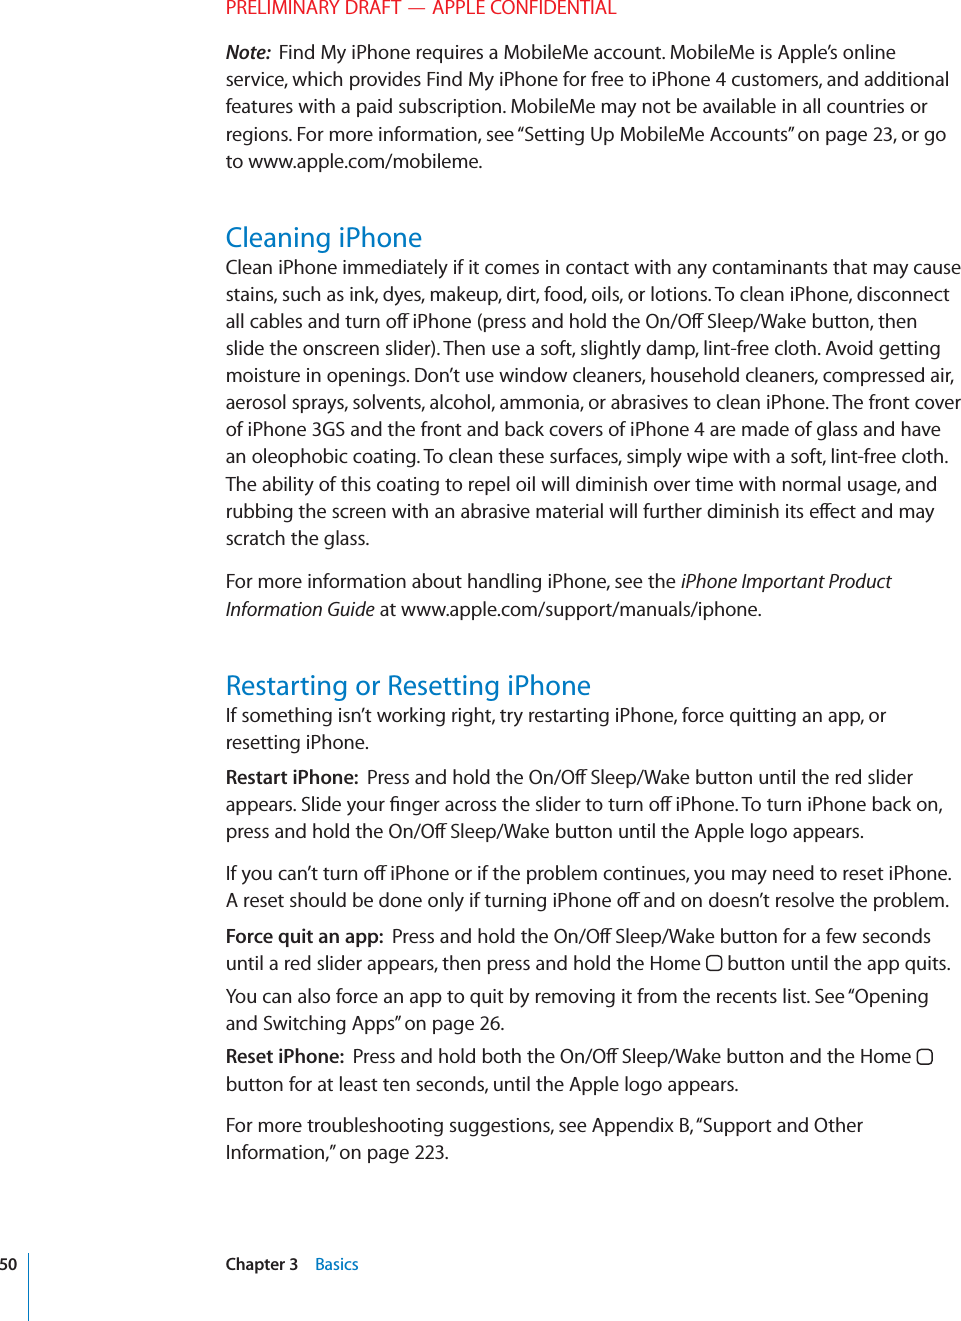 PRELIMINARY DRAFT — APPLE CONFIDENTIALNote:  Find My iPhone requires a MobileMe account. MobileMe is Apple’s online service, which provides Find My iPhone for free to iPhone 4 customers, and additional features with a paid subscription. MobileMe may not be available in all countries or regions. For more information, see “Setting Up MobileMe Accounts” on page 23, or go to www.apple.com/mobileme.Cleaning iPhoneClean iPhone immediately if it comes in contact with any contaminants that may cause stains, such as ink, dyes, makeup, dirt, food, oils, or lotions. To clean iPhone, disconnect all cables and turn o∂ iPhone (press and hold the On/O∂ Sleep/Wake button, then slide the onscreen slider). Then use a soft, slightly damp, lint-free cloth. Avoid getting moisture in openings. Don’t use window cleaners, household cleaners, compressed air, aerosol sprays, solvents, alcohol, ammonia, or abrasives to clean iPhone. The front cover of iPhone 3GS and the front and back covers of iPhone 4 are made of glass and have an oleophobic coating. To clean these surfaces, simply wipe with a soft, lint-free cloth. The ability of this coating to repel oil will diminish over time with normal usage, and rubbing the screen with an abrasive material will further diminish its e∂ect and may scratch the glass.For more information about handling iPhone, see the iPhone Important Product Information Guide at www.apple.com/support/manuals/iphone.Restarting or Resetting iPhoneIf something isn’t working right, try restarting iPhone, force quitting an app, or resetting iPhone.Restart iPhone:  Press and hold the On/O∂ Sleep/Wake button until the red slider appears. Slide your ﬁnger across the slider to turn o∂ iPhone. To turn iPhone back on, press and hold the On/O∂ Sleep/Wake button until the Apple logo appears.If you can’t turn o∂ iPhone or if the problem continues, you may need to reset iPhone. A reset should be done only if turning iPhone o∂ and on doesn’t resolve the problem.Force quit an app:  Press and hold the On/O∂ Sleep/Wake button for a few seconds until a red slider appears, then press and hold the Home   button until the app quits.You can also force an app to quit by removing it from the recents list. See “Opening and Switching Apps” on page 26.Reset iPhone:  Press and hold both the On/O∂ Sleep/Wake button and the Home   button for at least ten seconds, until the Apple logo appears.For more troubleshooting suggestions, see Appendix B, “Support and Other Information,” on page 223.50 Chapter 3    Basics